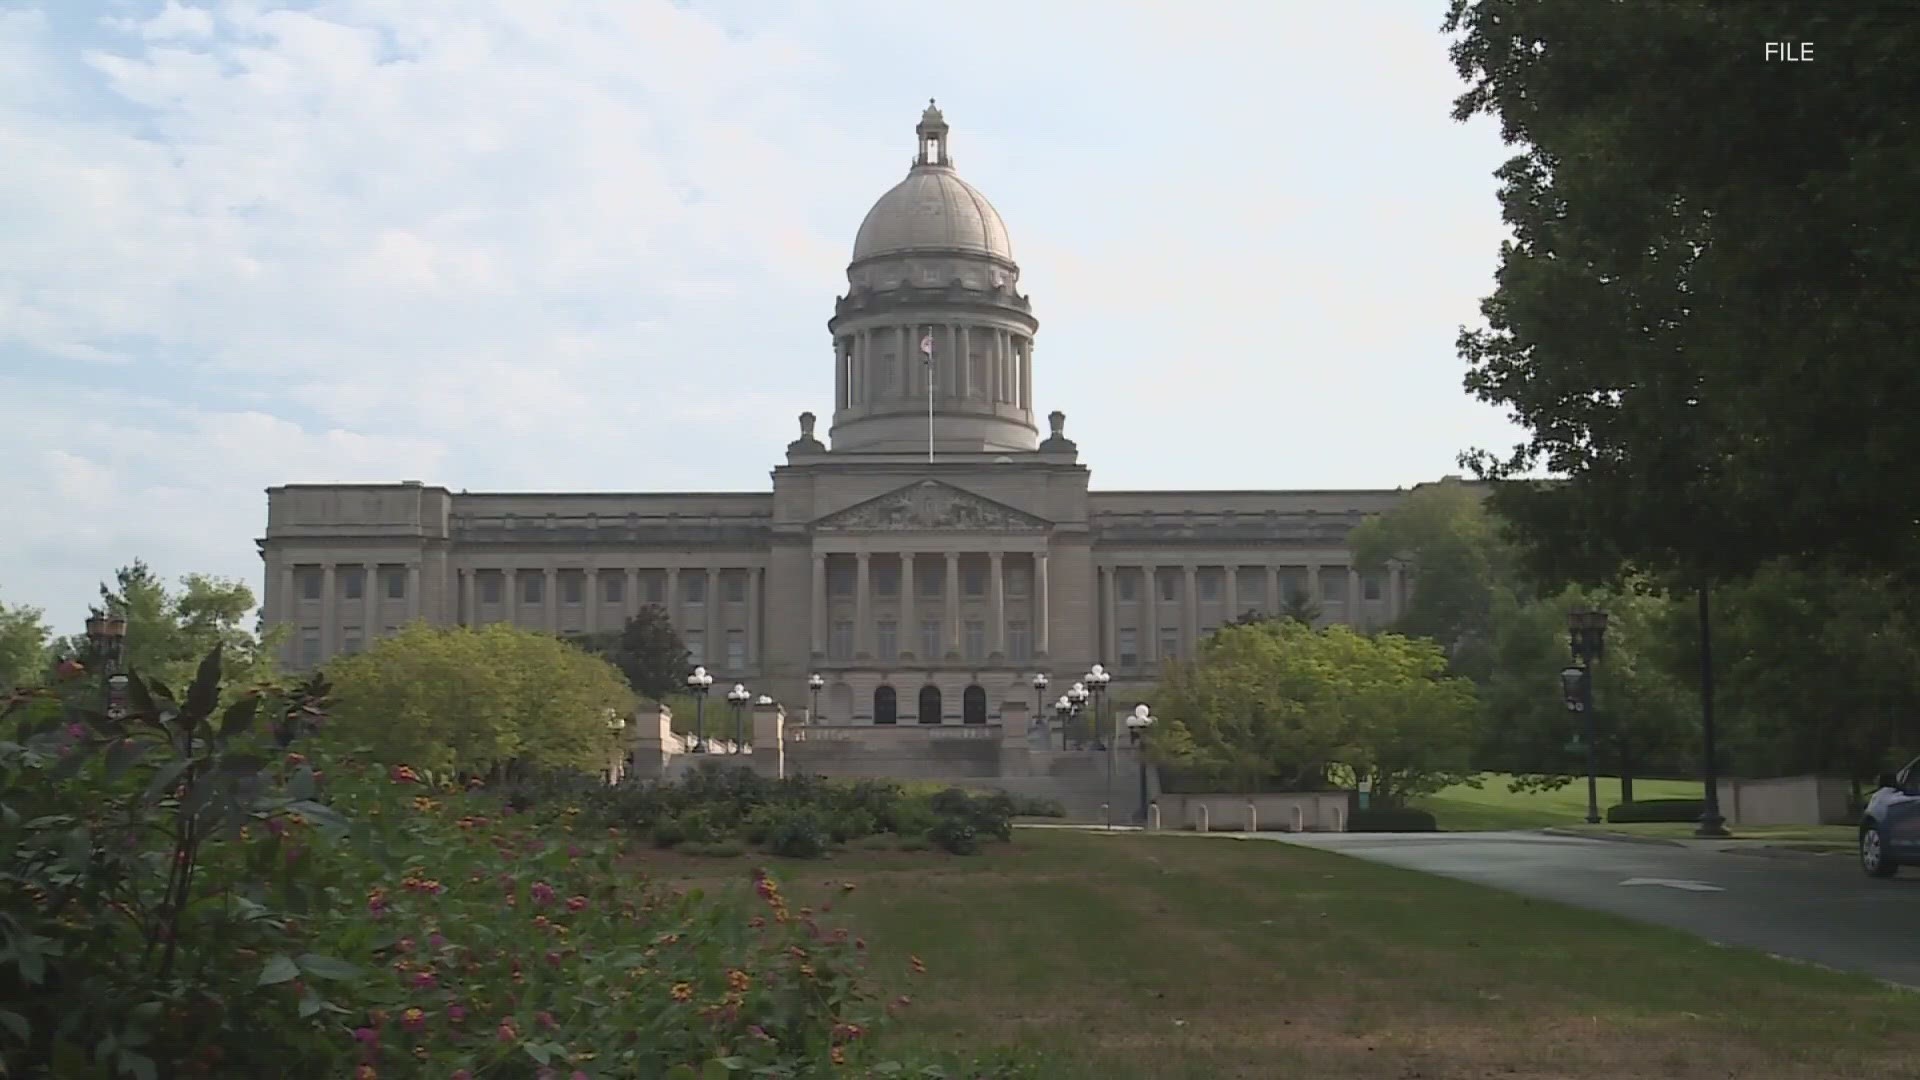 Thursday is Animal Action Day and advocates will be rallying against animal abuse at the Kentucky State Capitol.